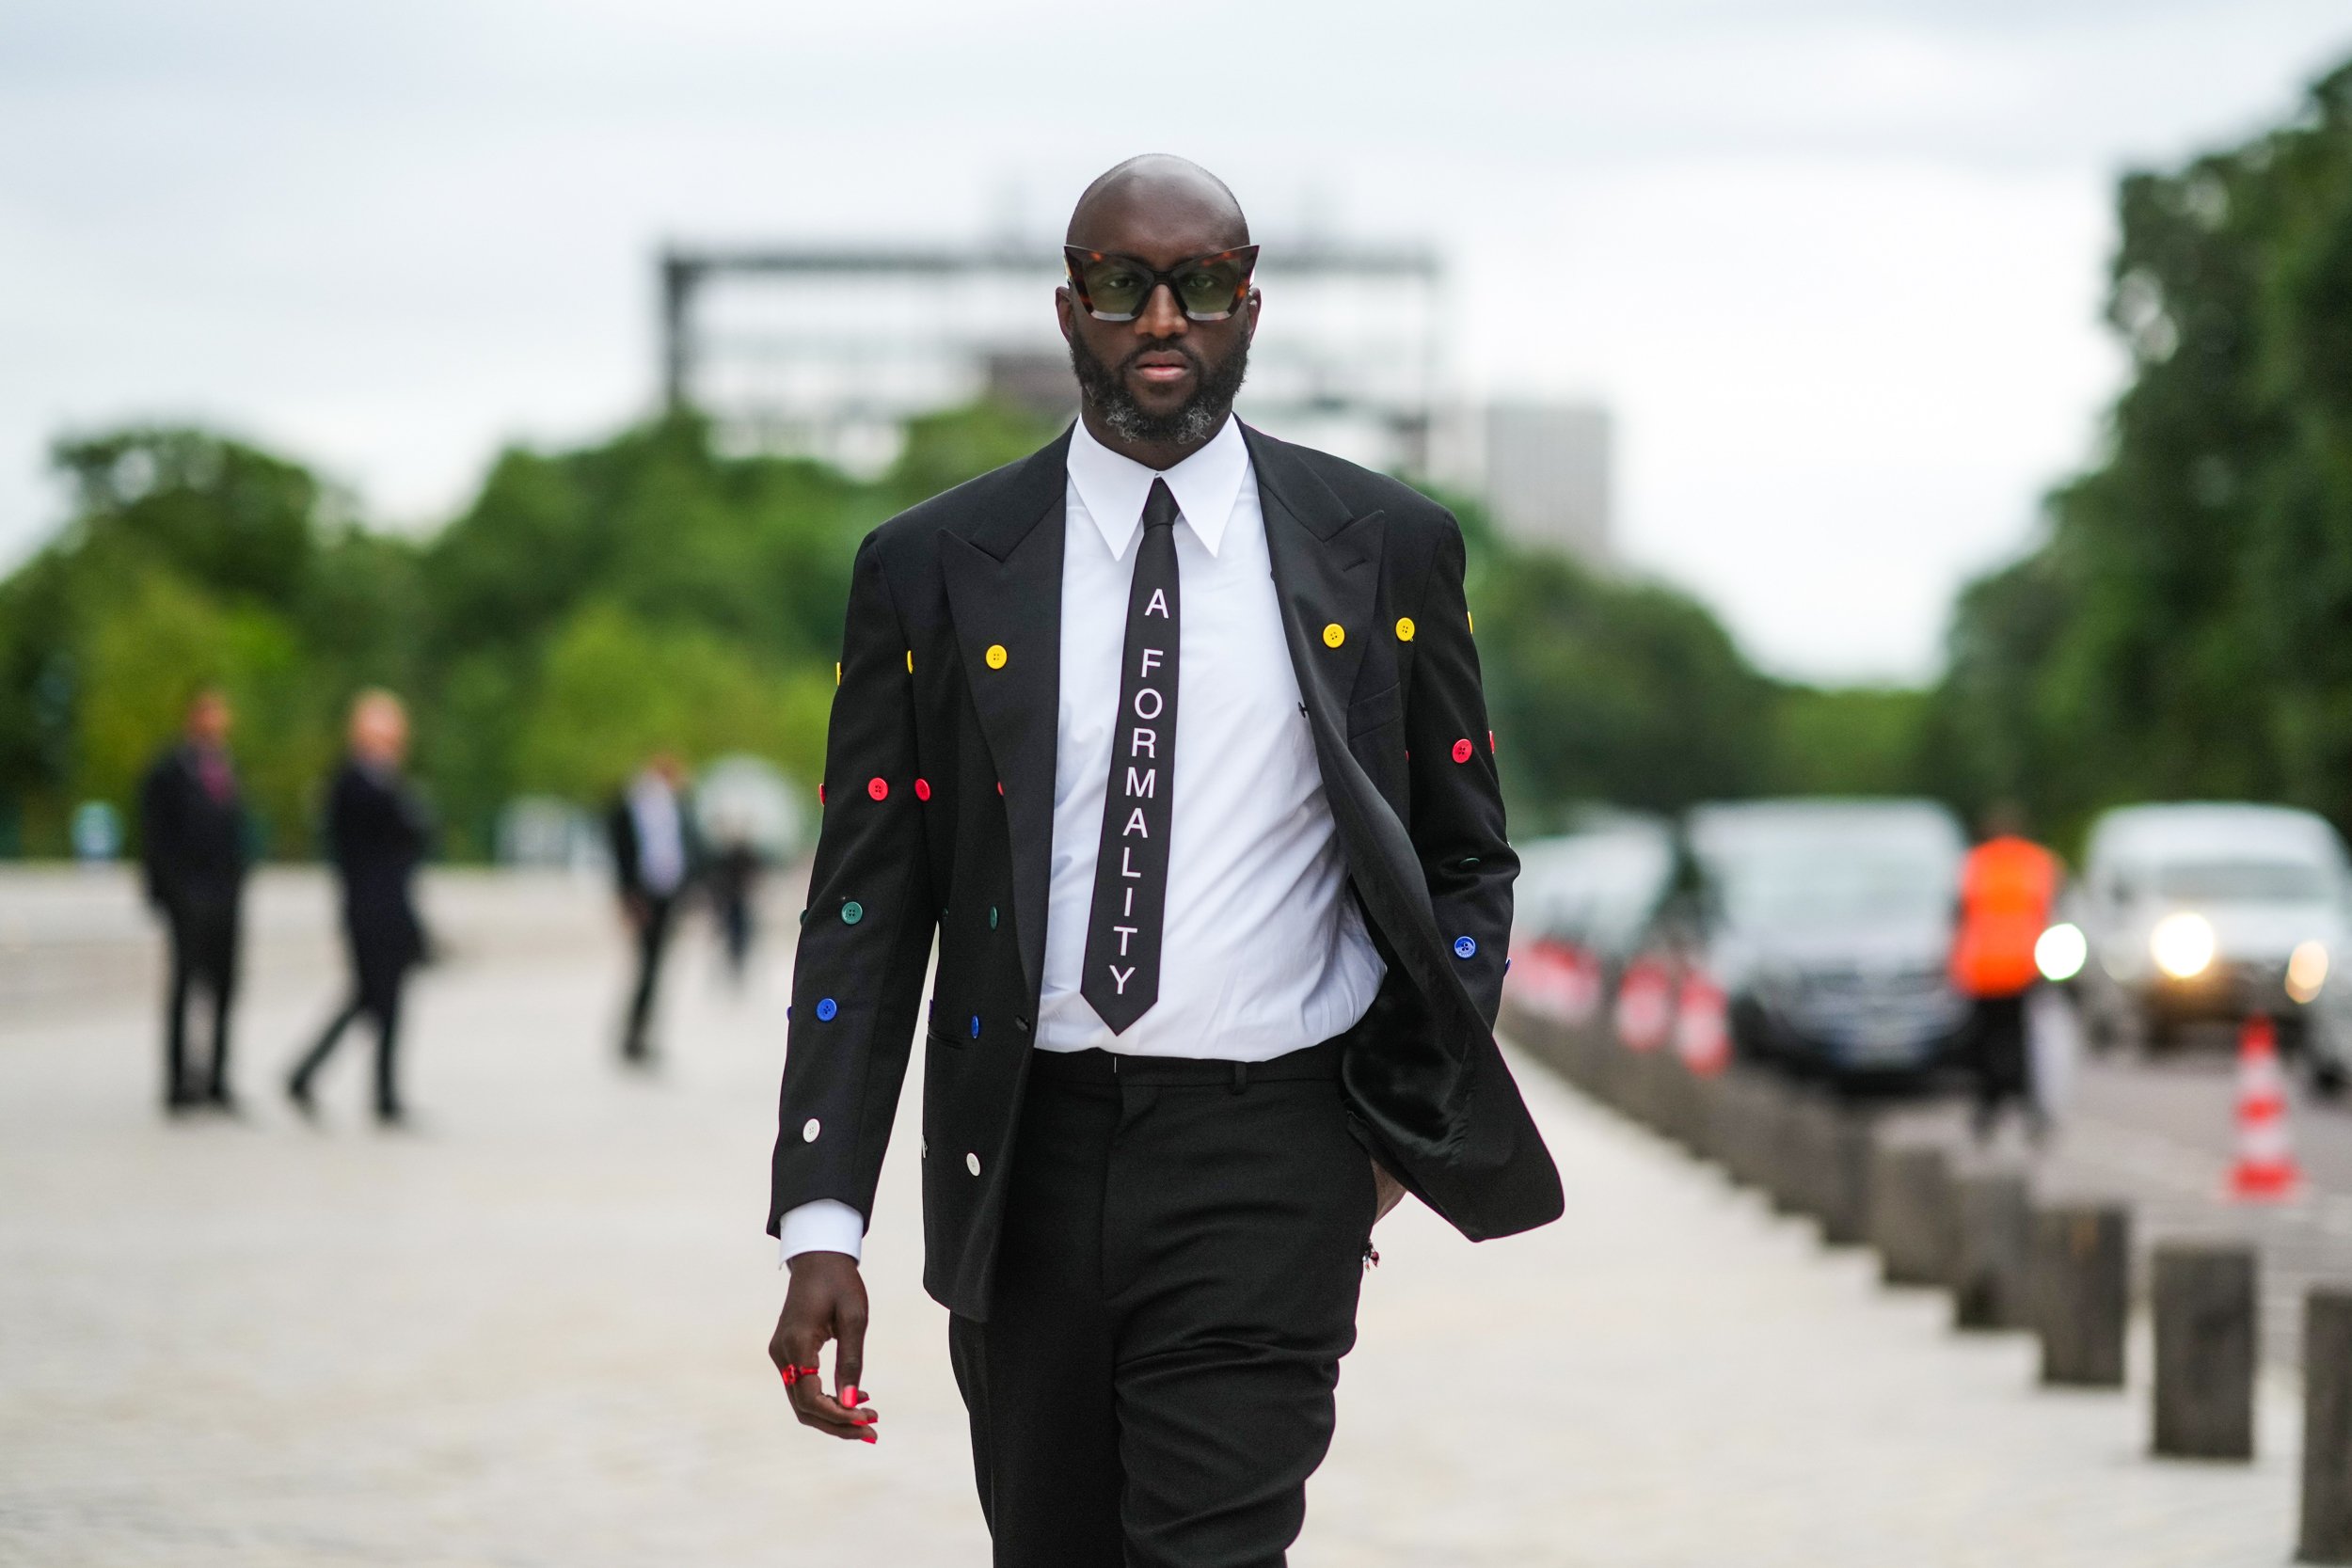 The life of Virgil Abloh